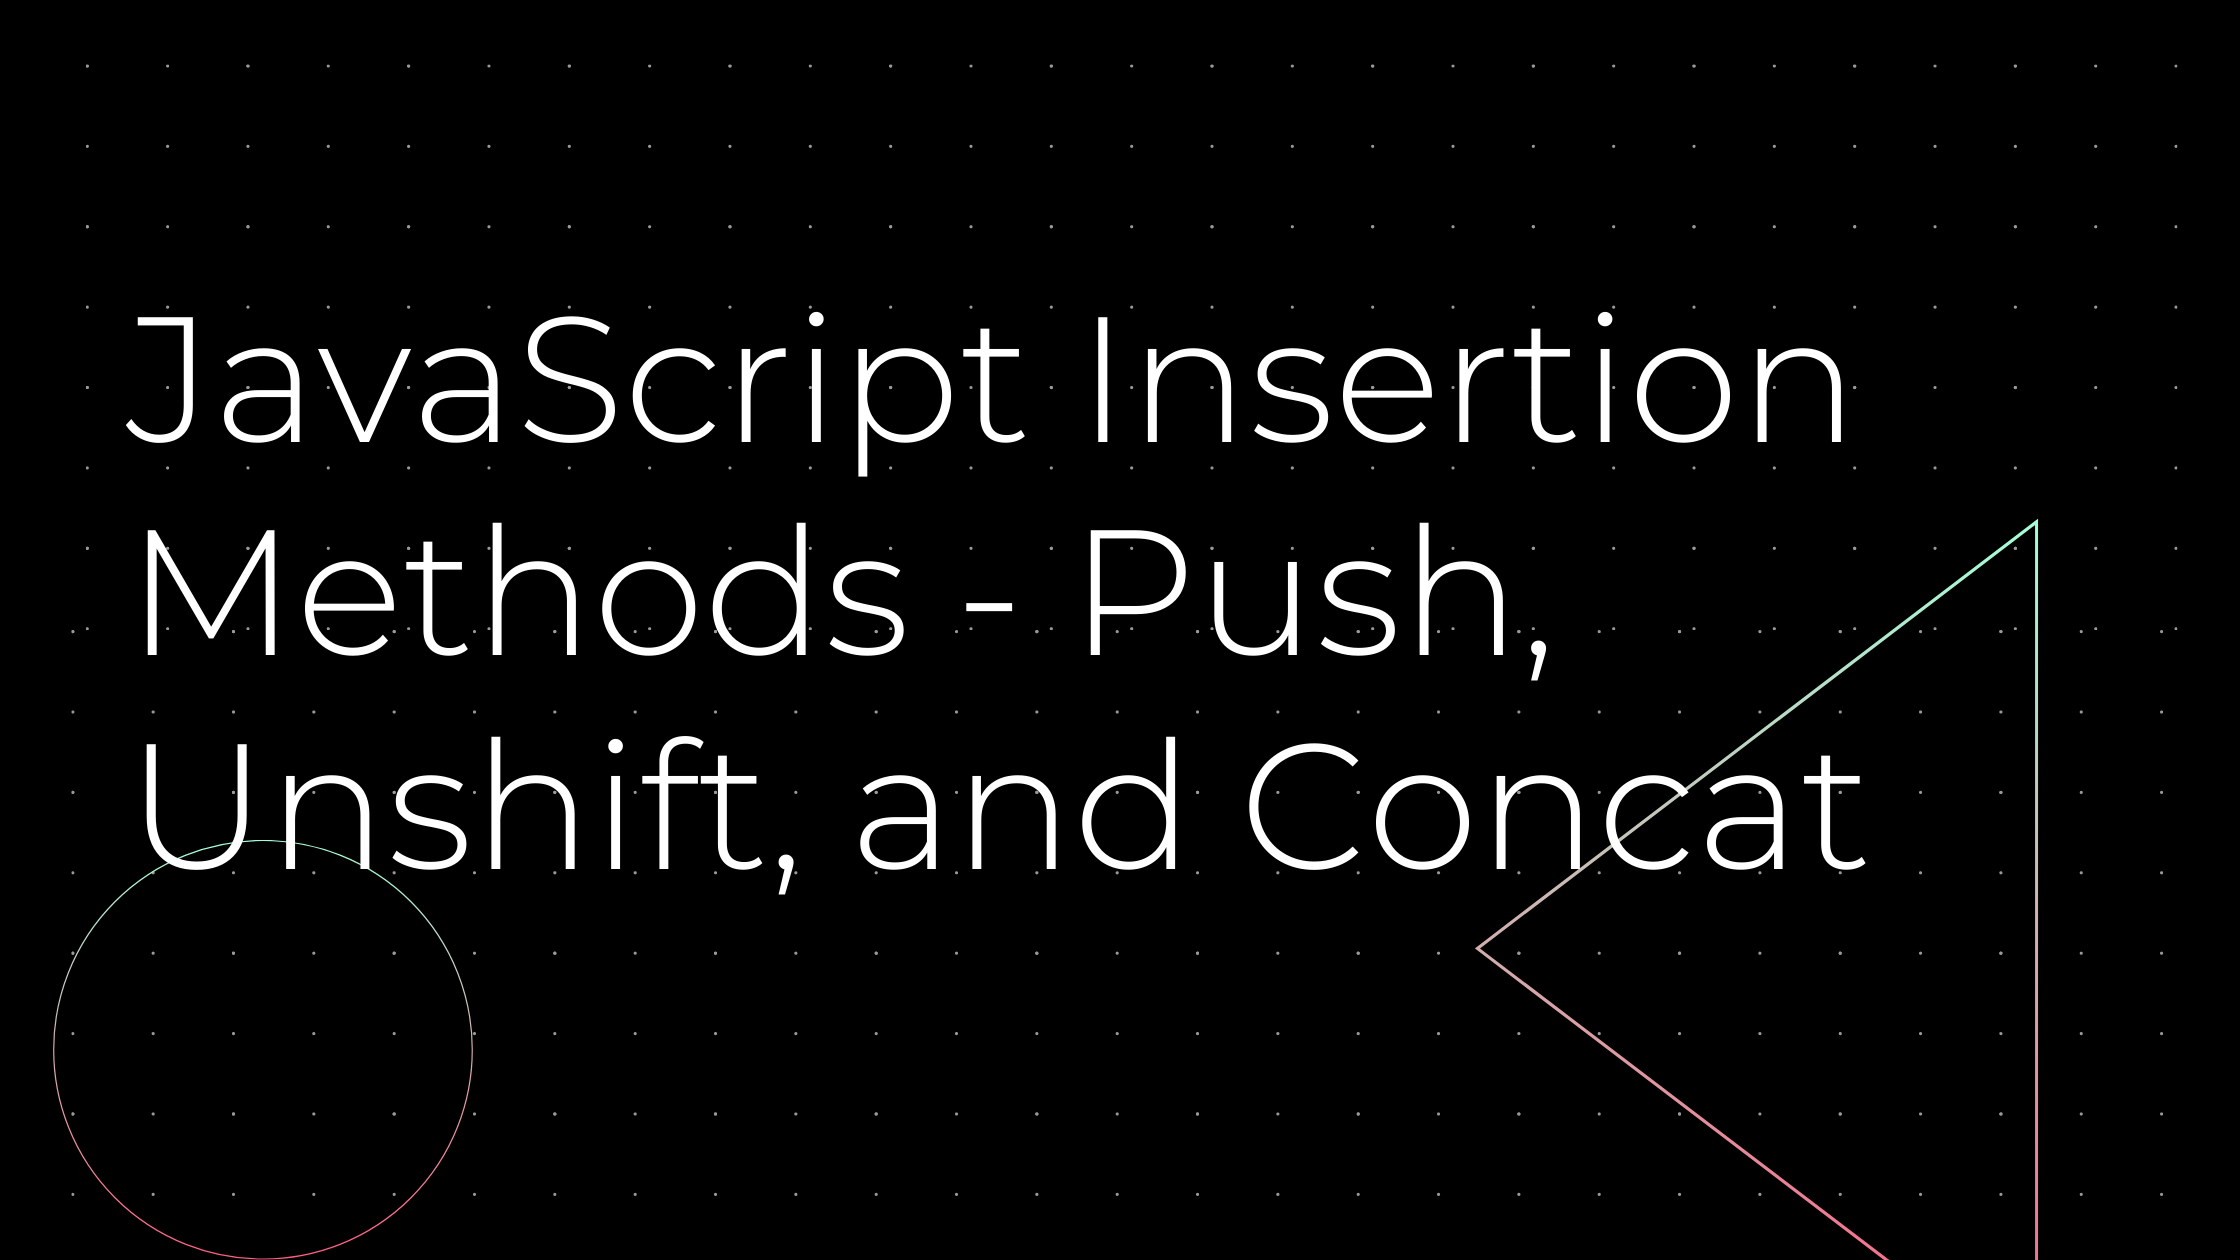 JavaScript Array Insert - How to Add to an Array with the Push, Unshift, and Concat Functions